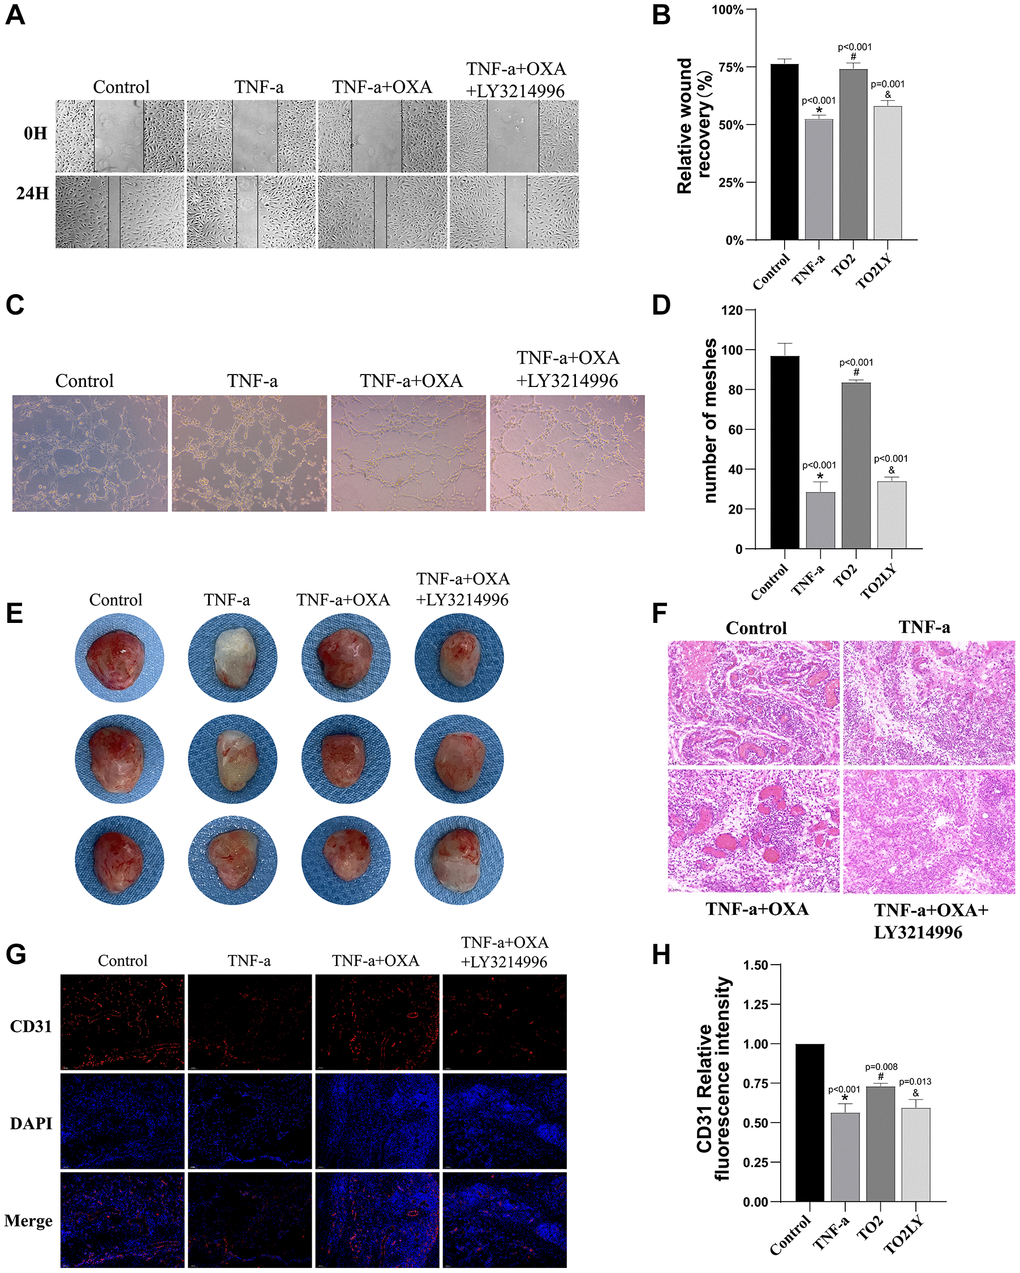 Orexin-A enhanced HUVEC angiogenesis and wound healing through TF-AKT/ERK pathway. (A) Representative images depicting the combined administration of LY3214996 (1 μM) and Orexin-A (0.5 μM) on wound healing effects. (B) The quantification of scratch assay results for each group is shown, measuring the closure of scratch gaps (n = 3). (C) Representative images illustrating the impact of the combined administration of LY3214996 (1 μM) and Orexin-A (0.5 μM) on vascular formation. (D) Displays the quantification of tube formation assay results for each group, calculating the number of formed tubes (n = 3). (E) Representative gross morphology of Matrigel in situ (n = 3). (F) Representative H&E-stained images of matrix plug sections (n =3). (G) Representative immunofluorescence images of CD31-positive cells within matrix plugs. (H) Quantitative analysis of the proportion of CD31-positive cells within matrix plugs (n = 3). Results are expressed as means ± standard deviation, the statistical significance of differences was evaluated by One-way ANOVA, *denotes the comparison between the Sham group and the TBI group, #represents the comparison between the TBI and the Sham-tDCS group, &signifies the comparison between the tDCS group and the Sham-tDCS group, and ¥indicates the comparison between the tDCS group and the tDCS+SB334867 group. P 